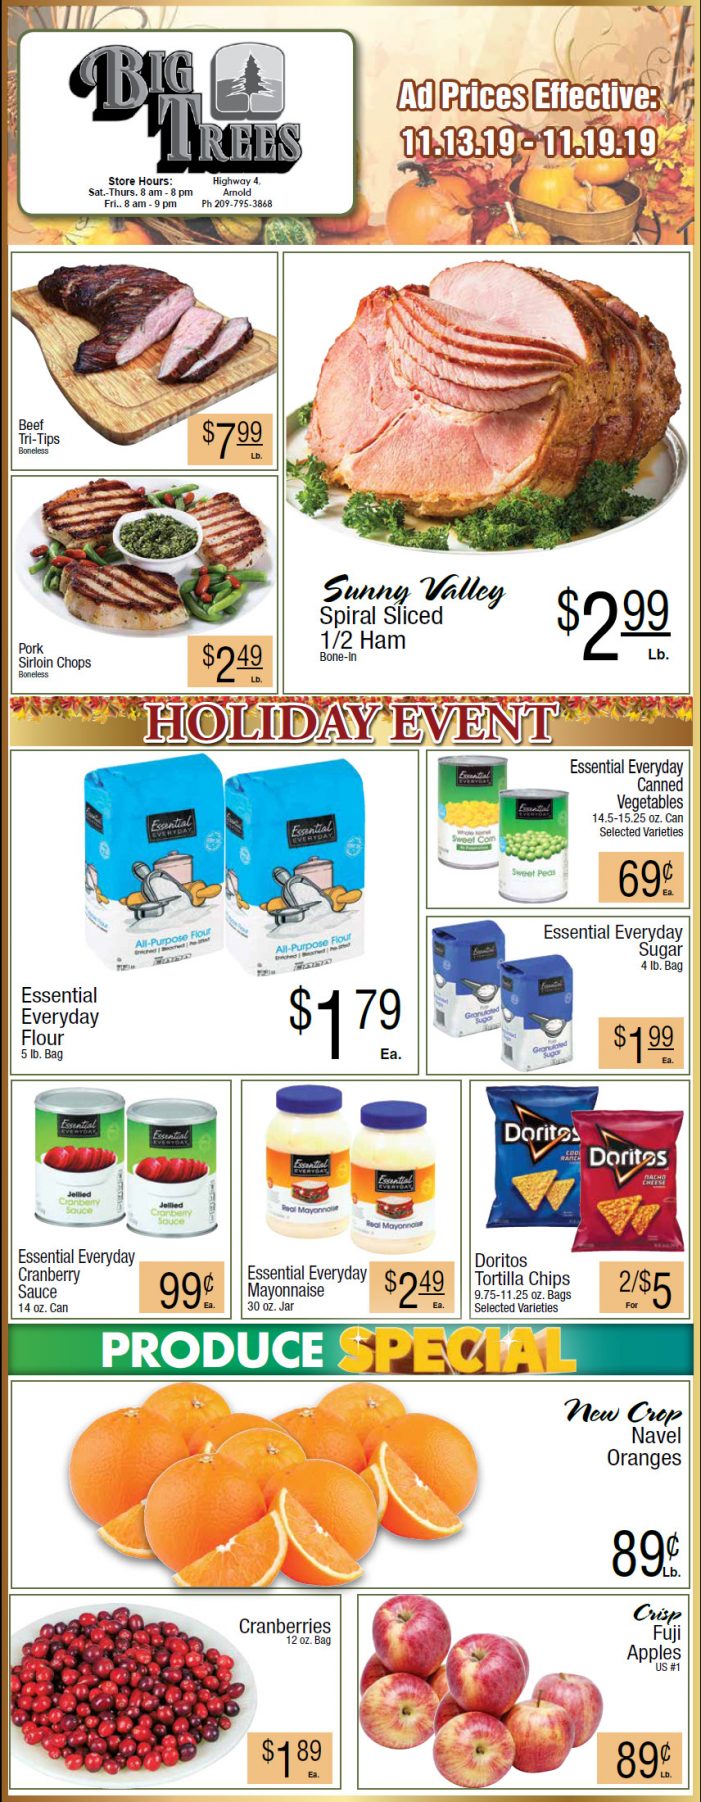 Big Trees Market Weekly Ad & Grocery Specials Through November 19